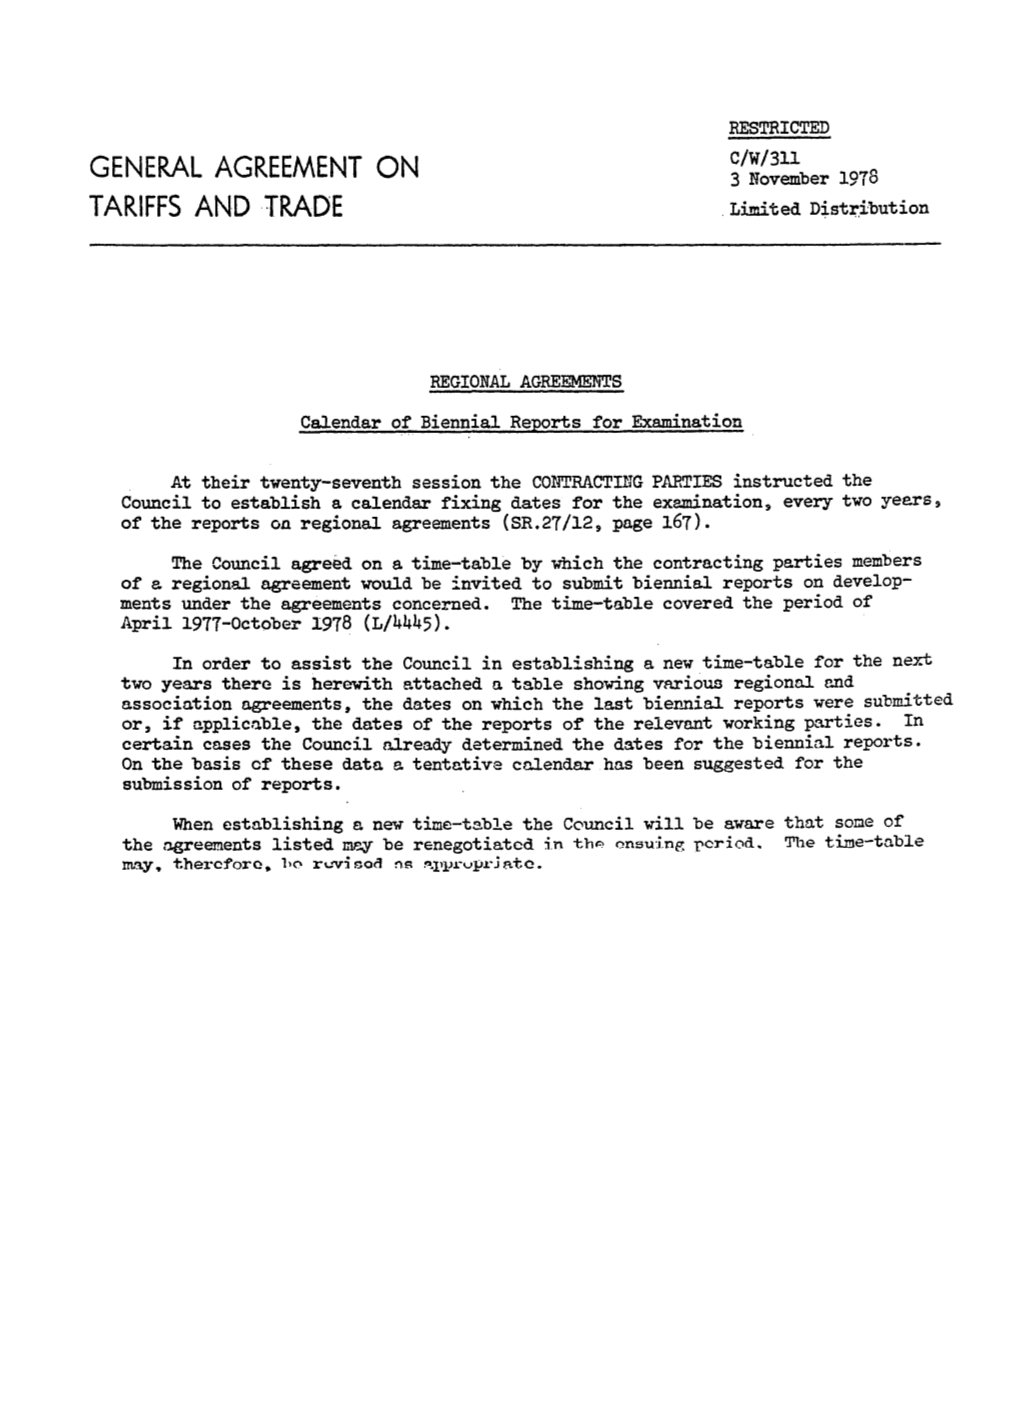 GENERAL AGREEMENT on C/W/3113 November 1978 TARIFFS and TRADE Limited Distribution